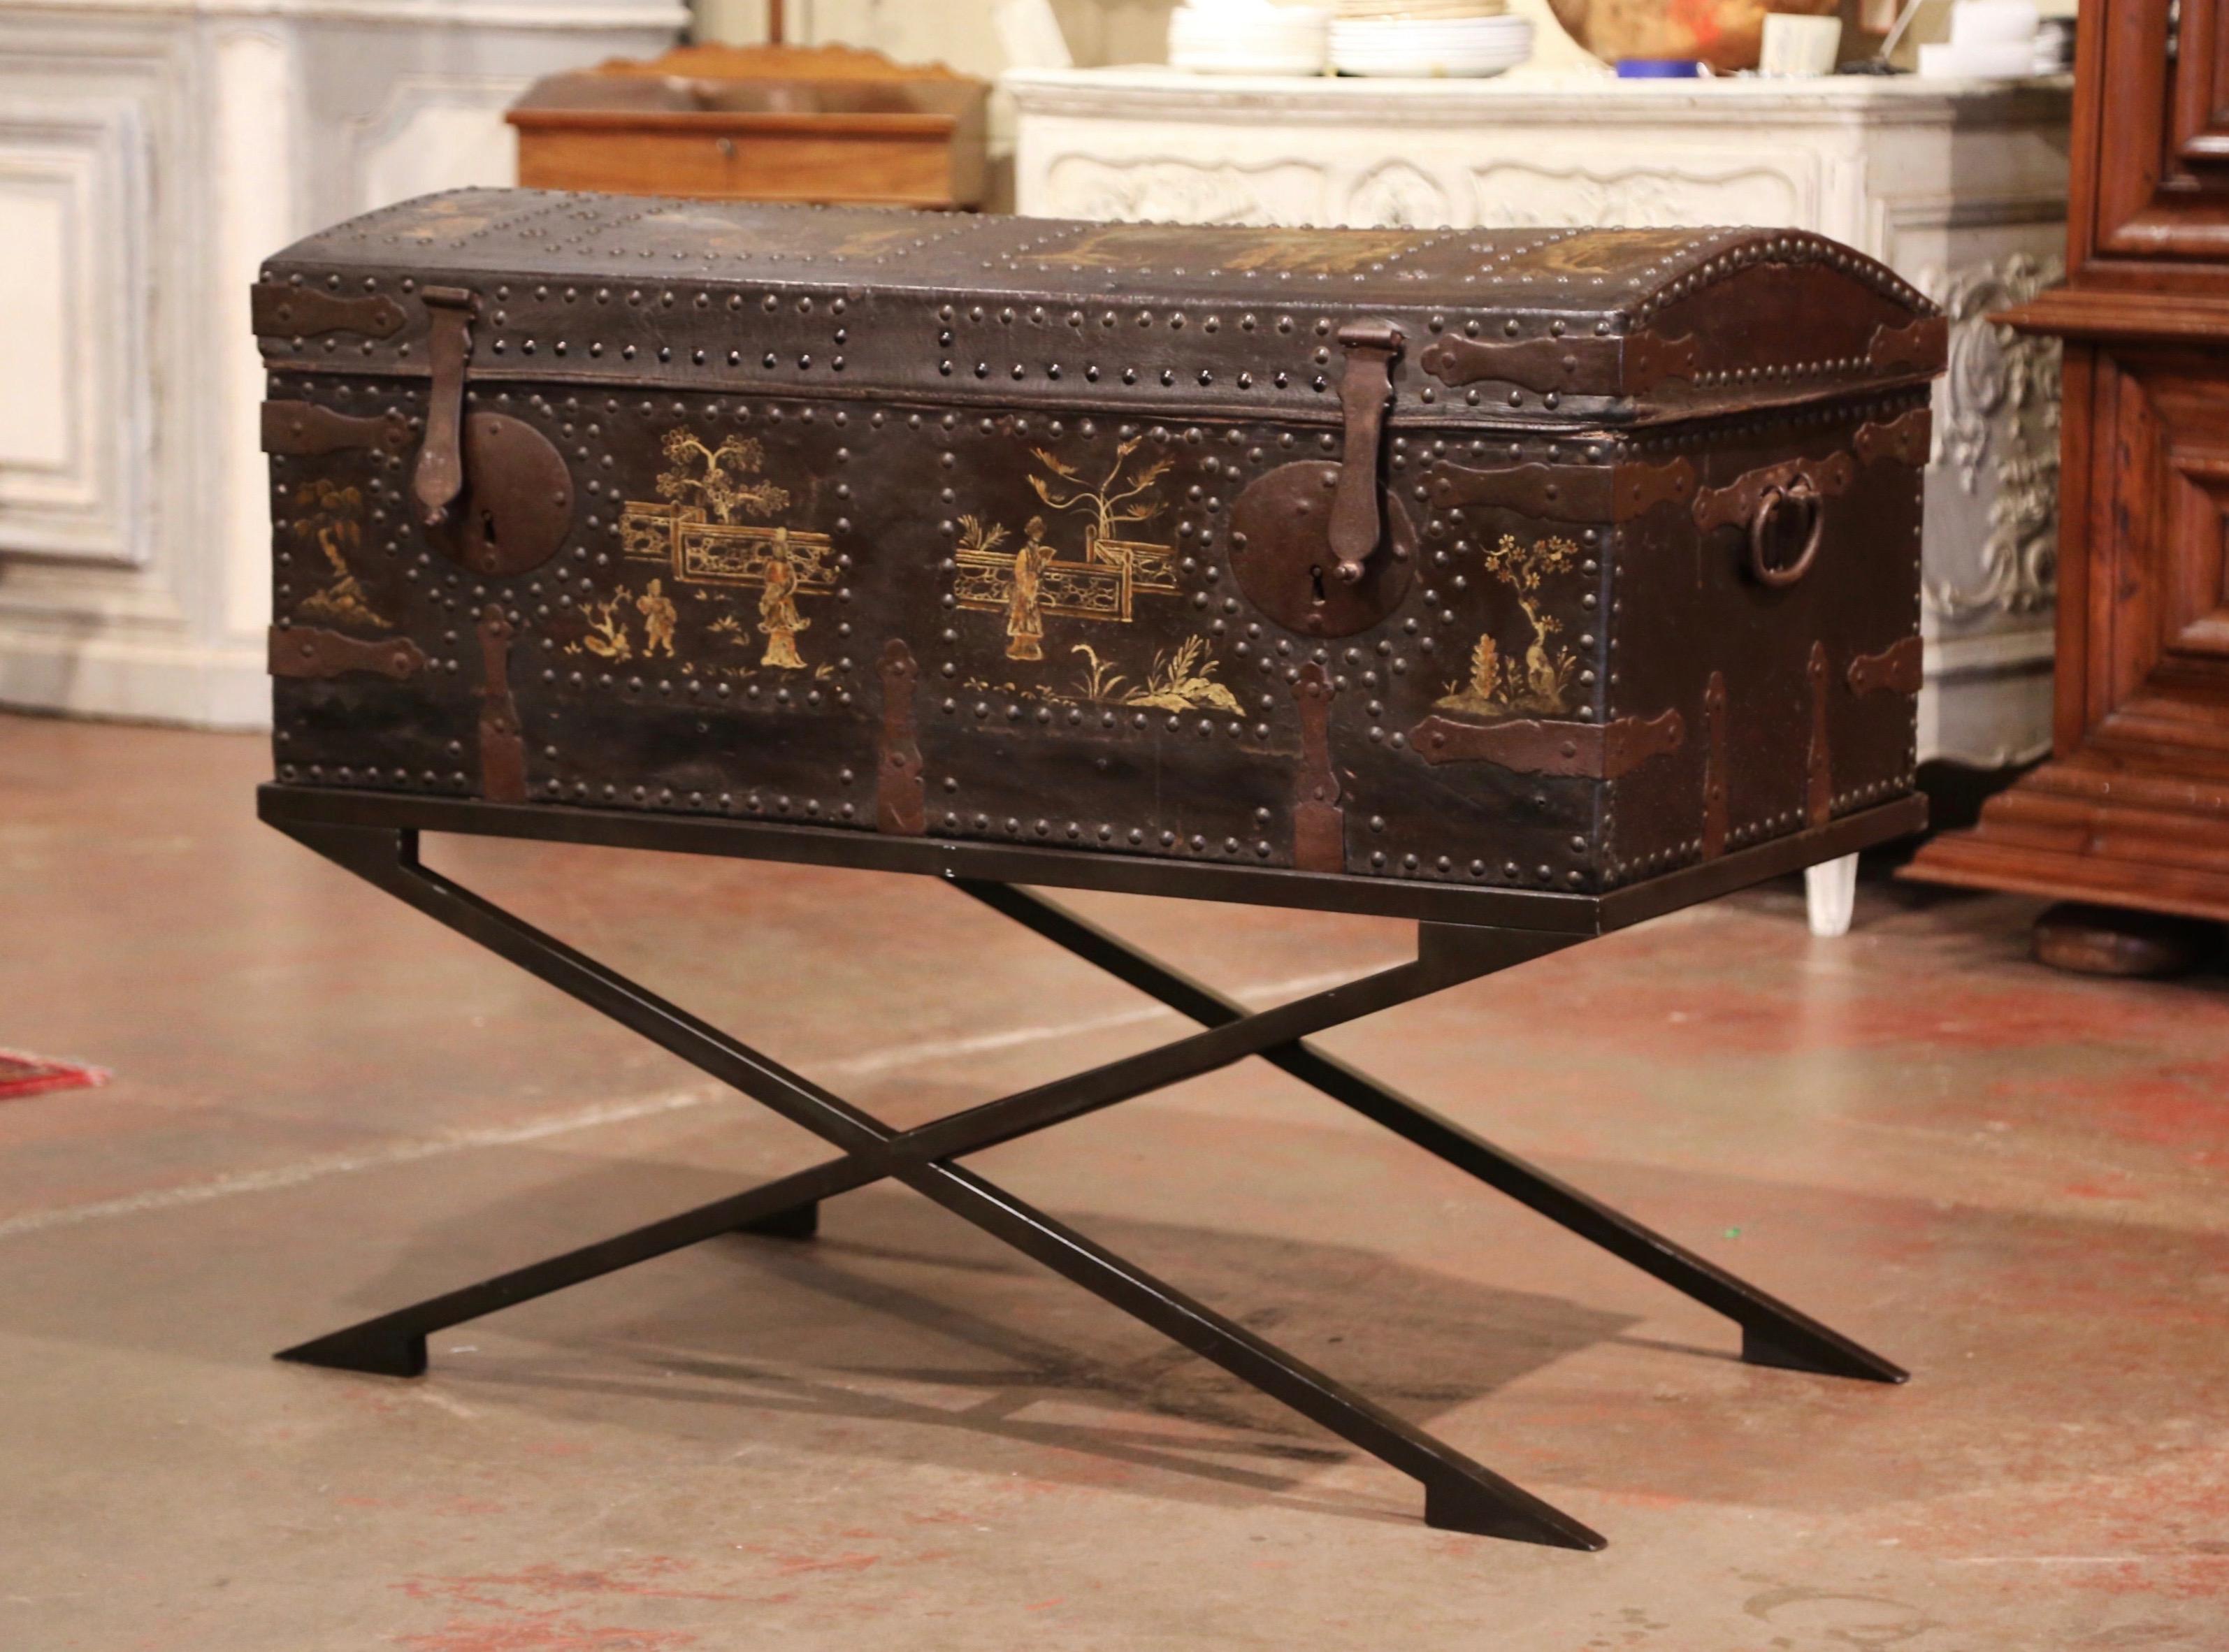 19th Century French Gothic Leather Trunk in Iron Base with Chinoiserie Decor 3